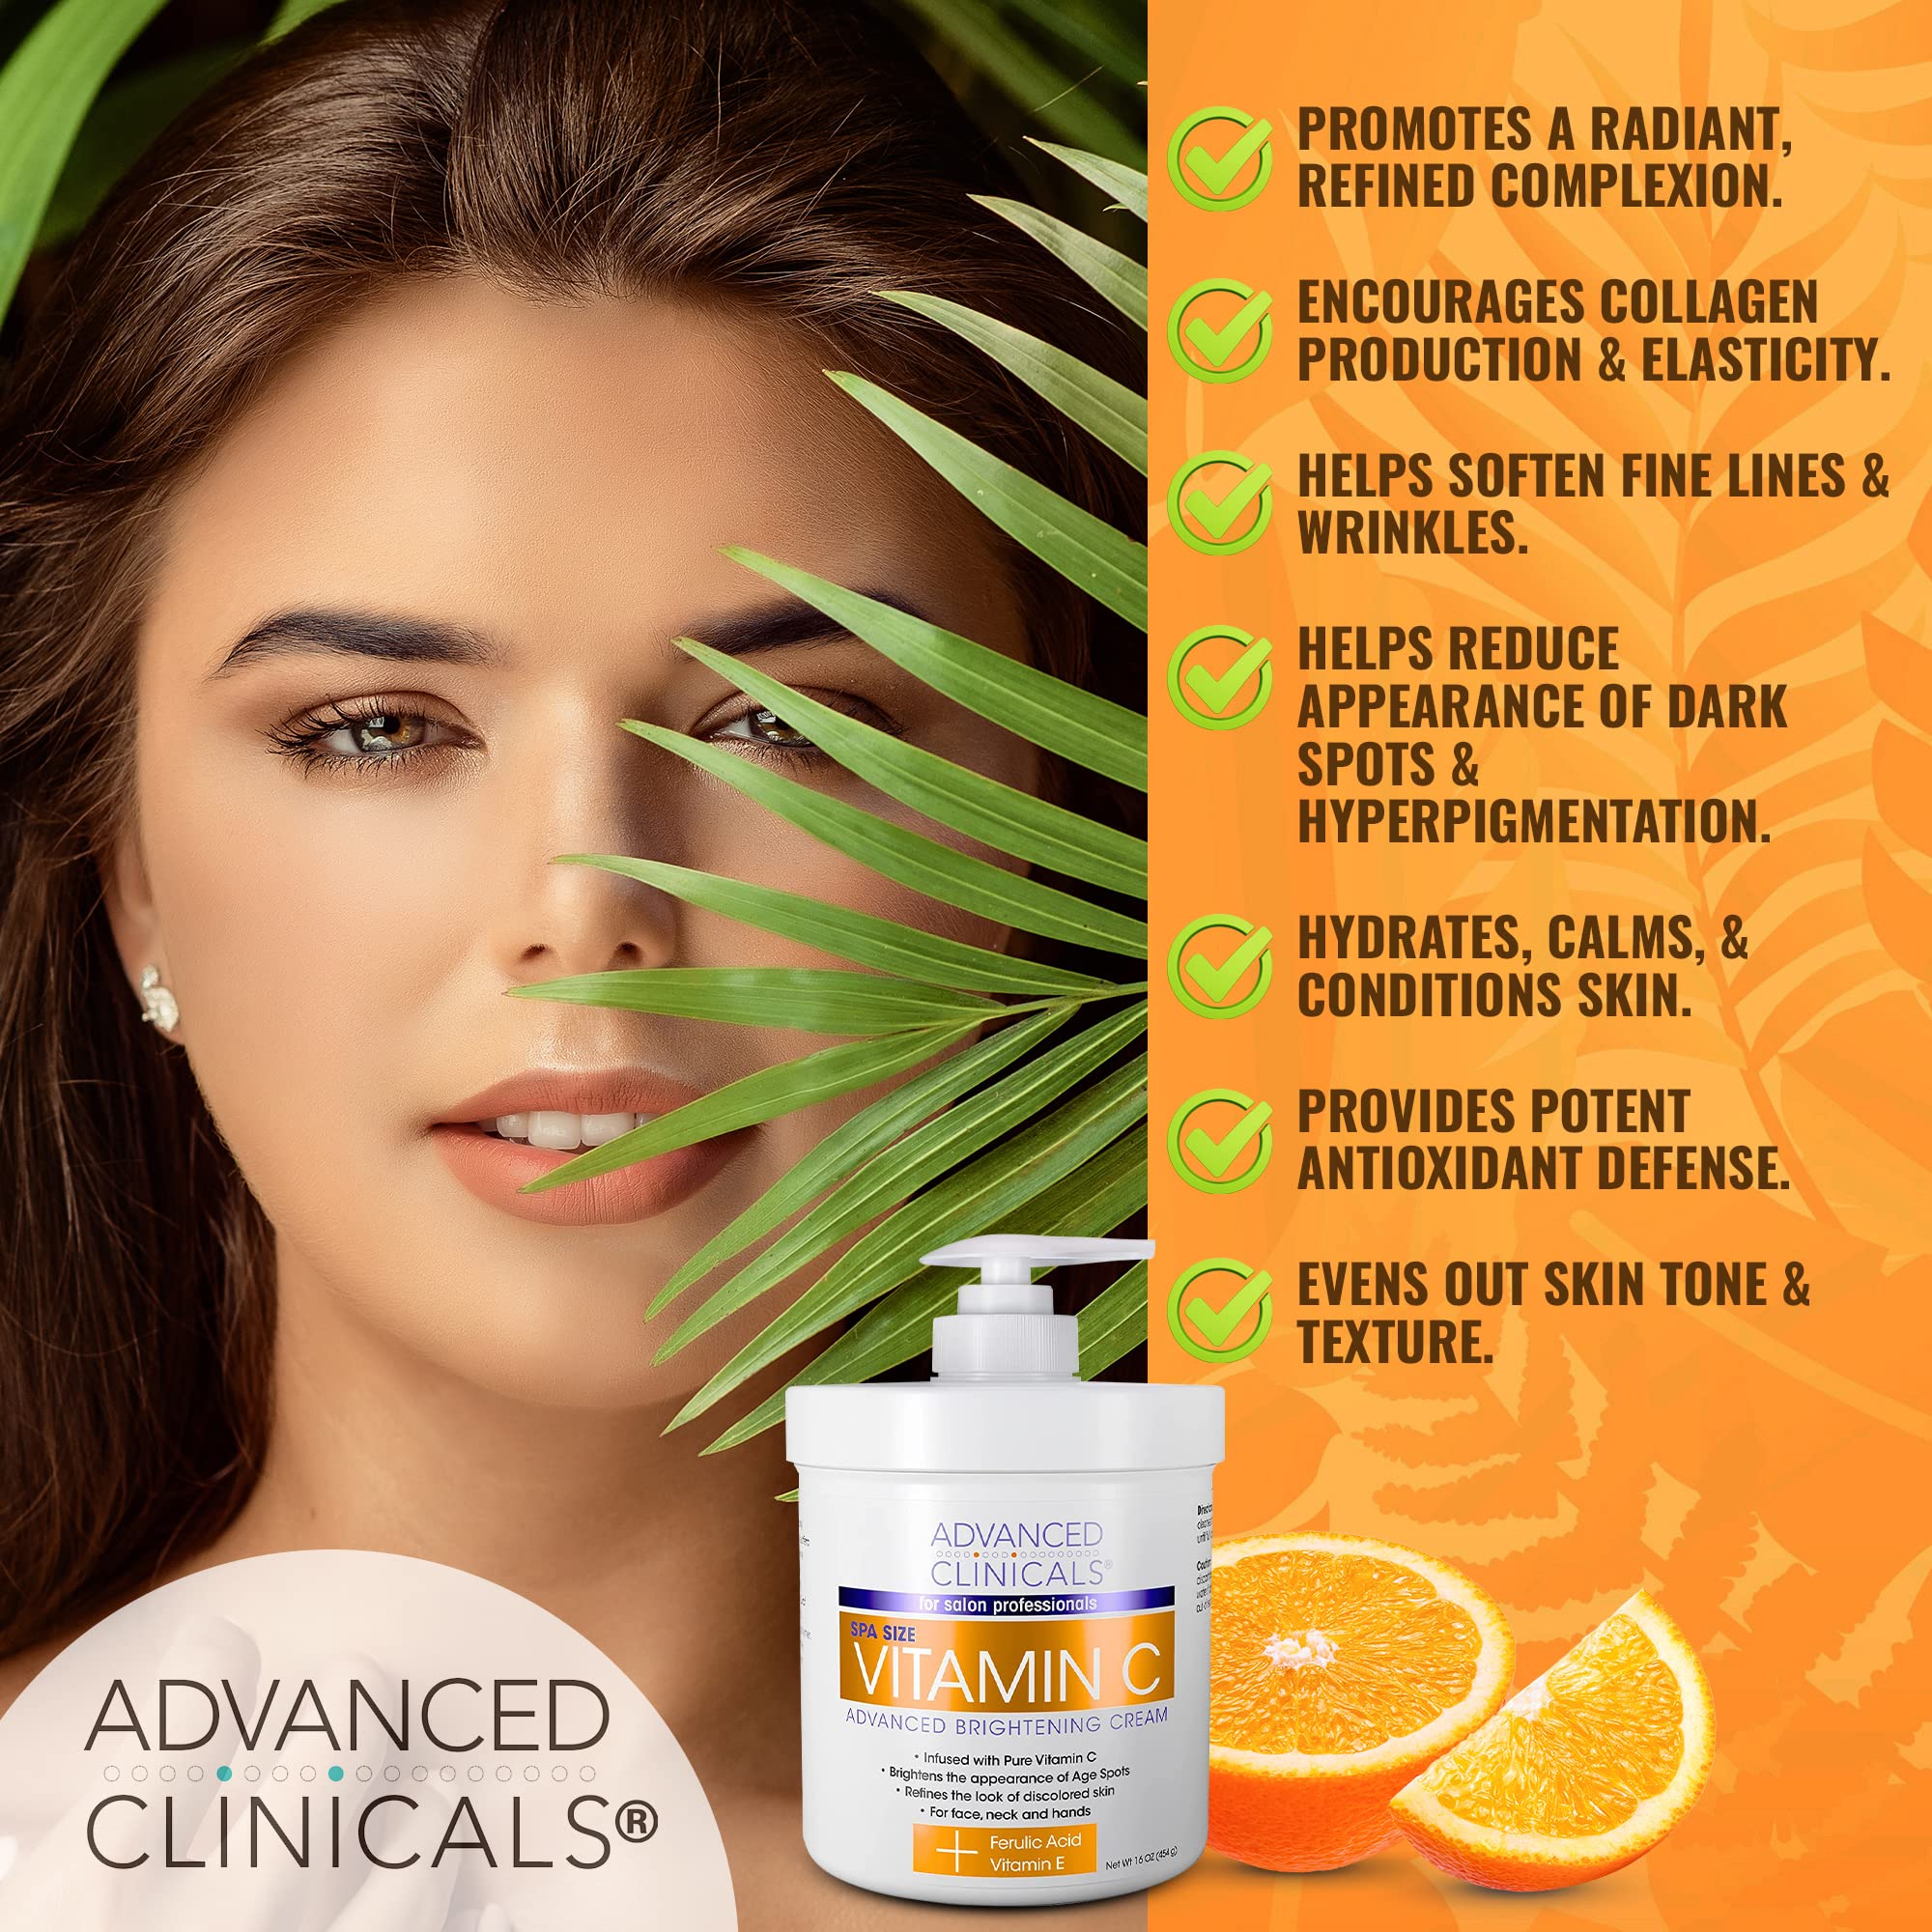 Advanced Clinicals Vitamin C Cream Face Lotion & Body Lotion Moisturizer | Anti Aging Skin Care Firming & Brightening Cream For Body, Face, Uneven Skin Tone, Wrinkles, & Sun Damaged Dry Skin, 16 Oz